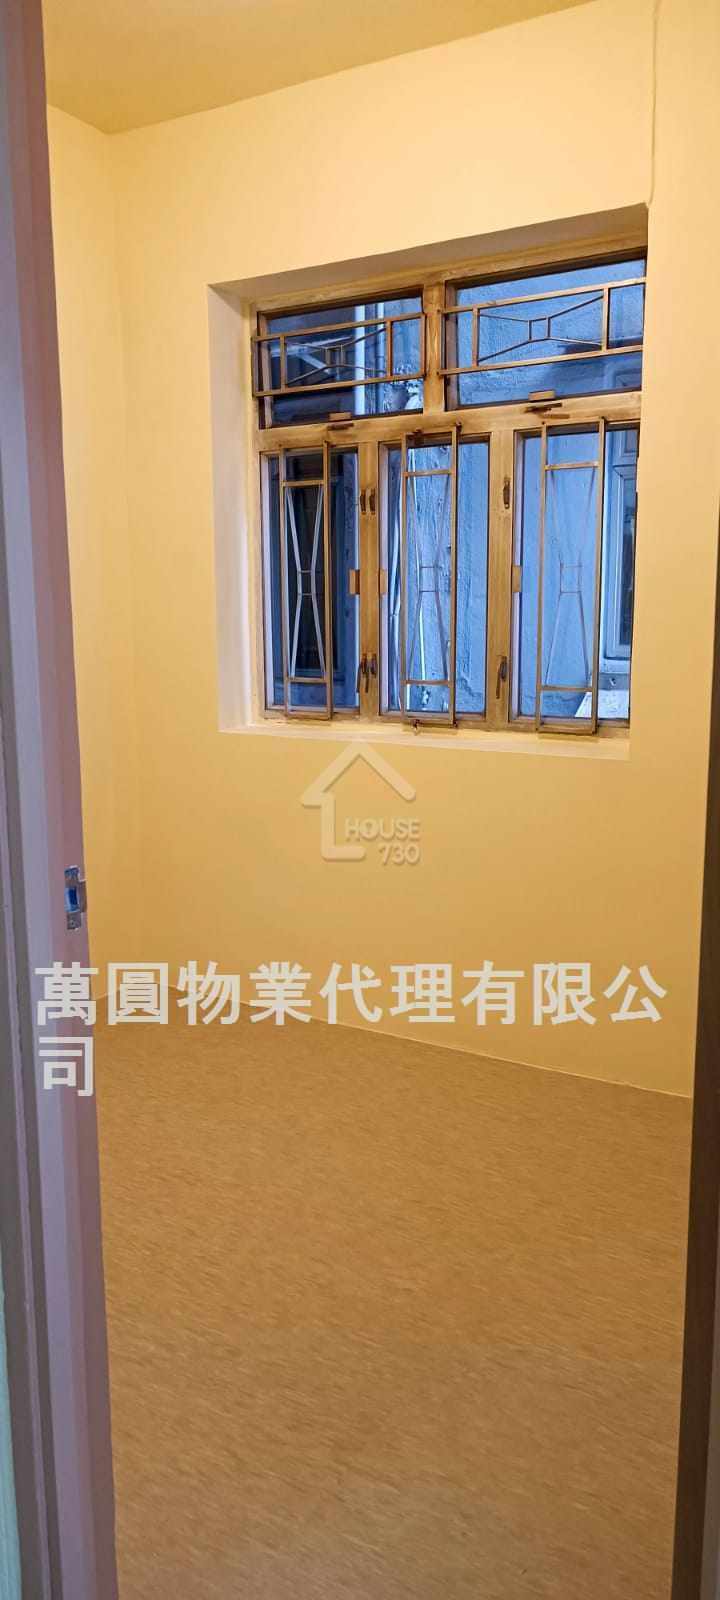 Tai Kok Tsui CHUNG HING BUILDING Middle Floor Master Room House730-6238277